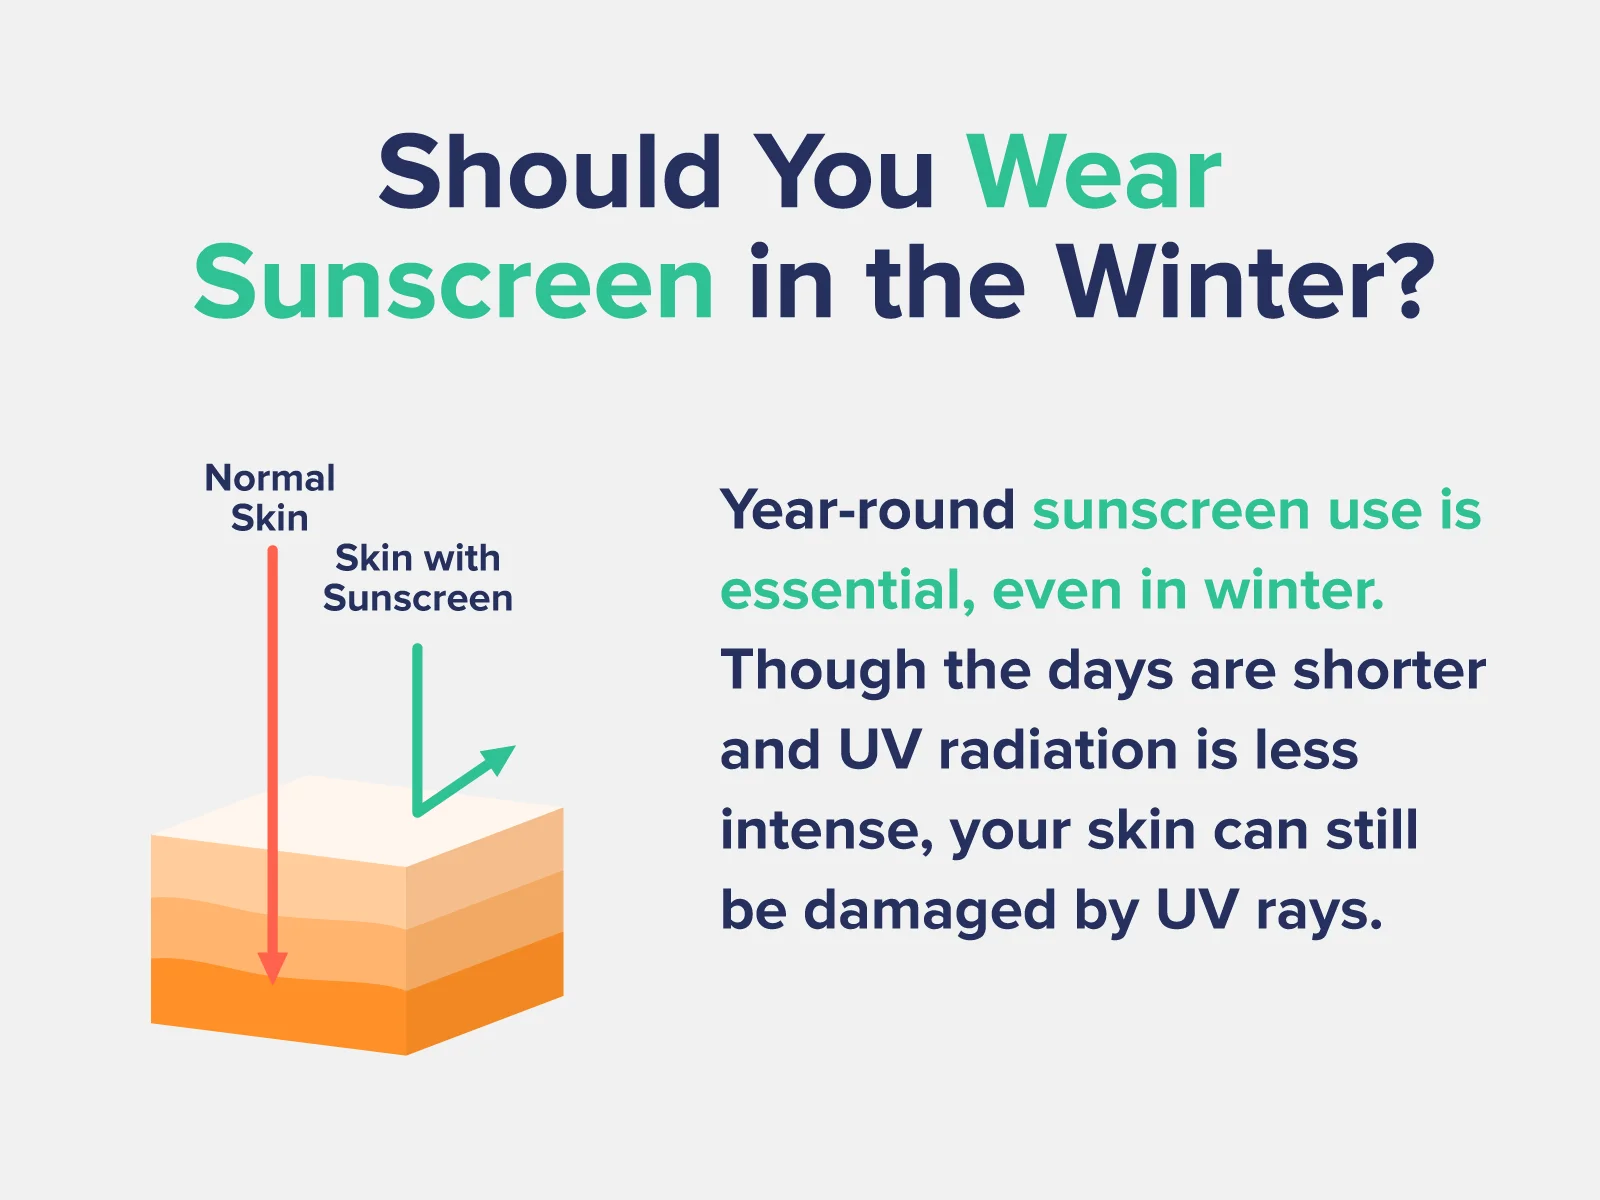 year round sunscreen use is essential